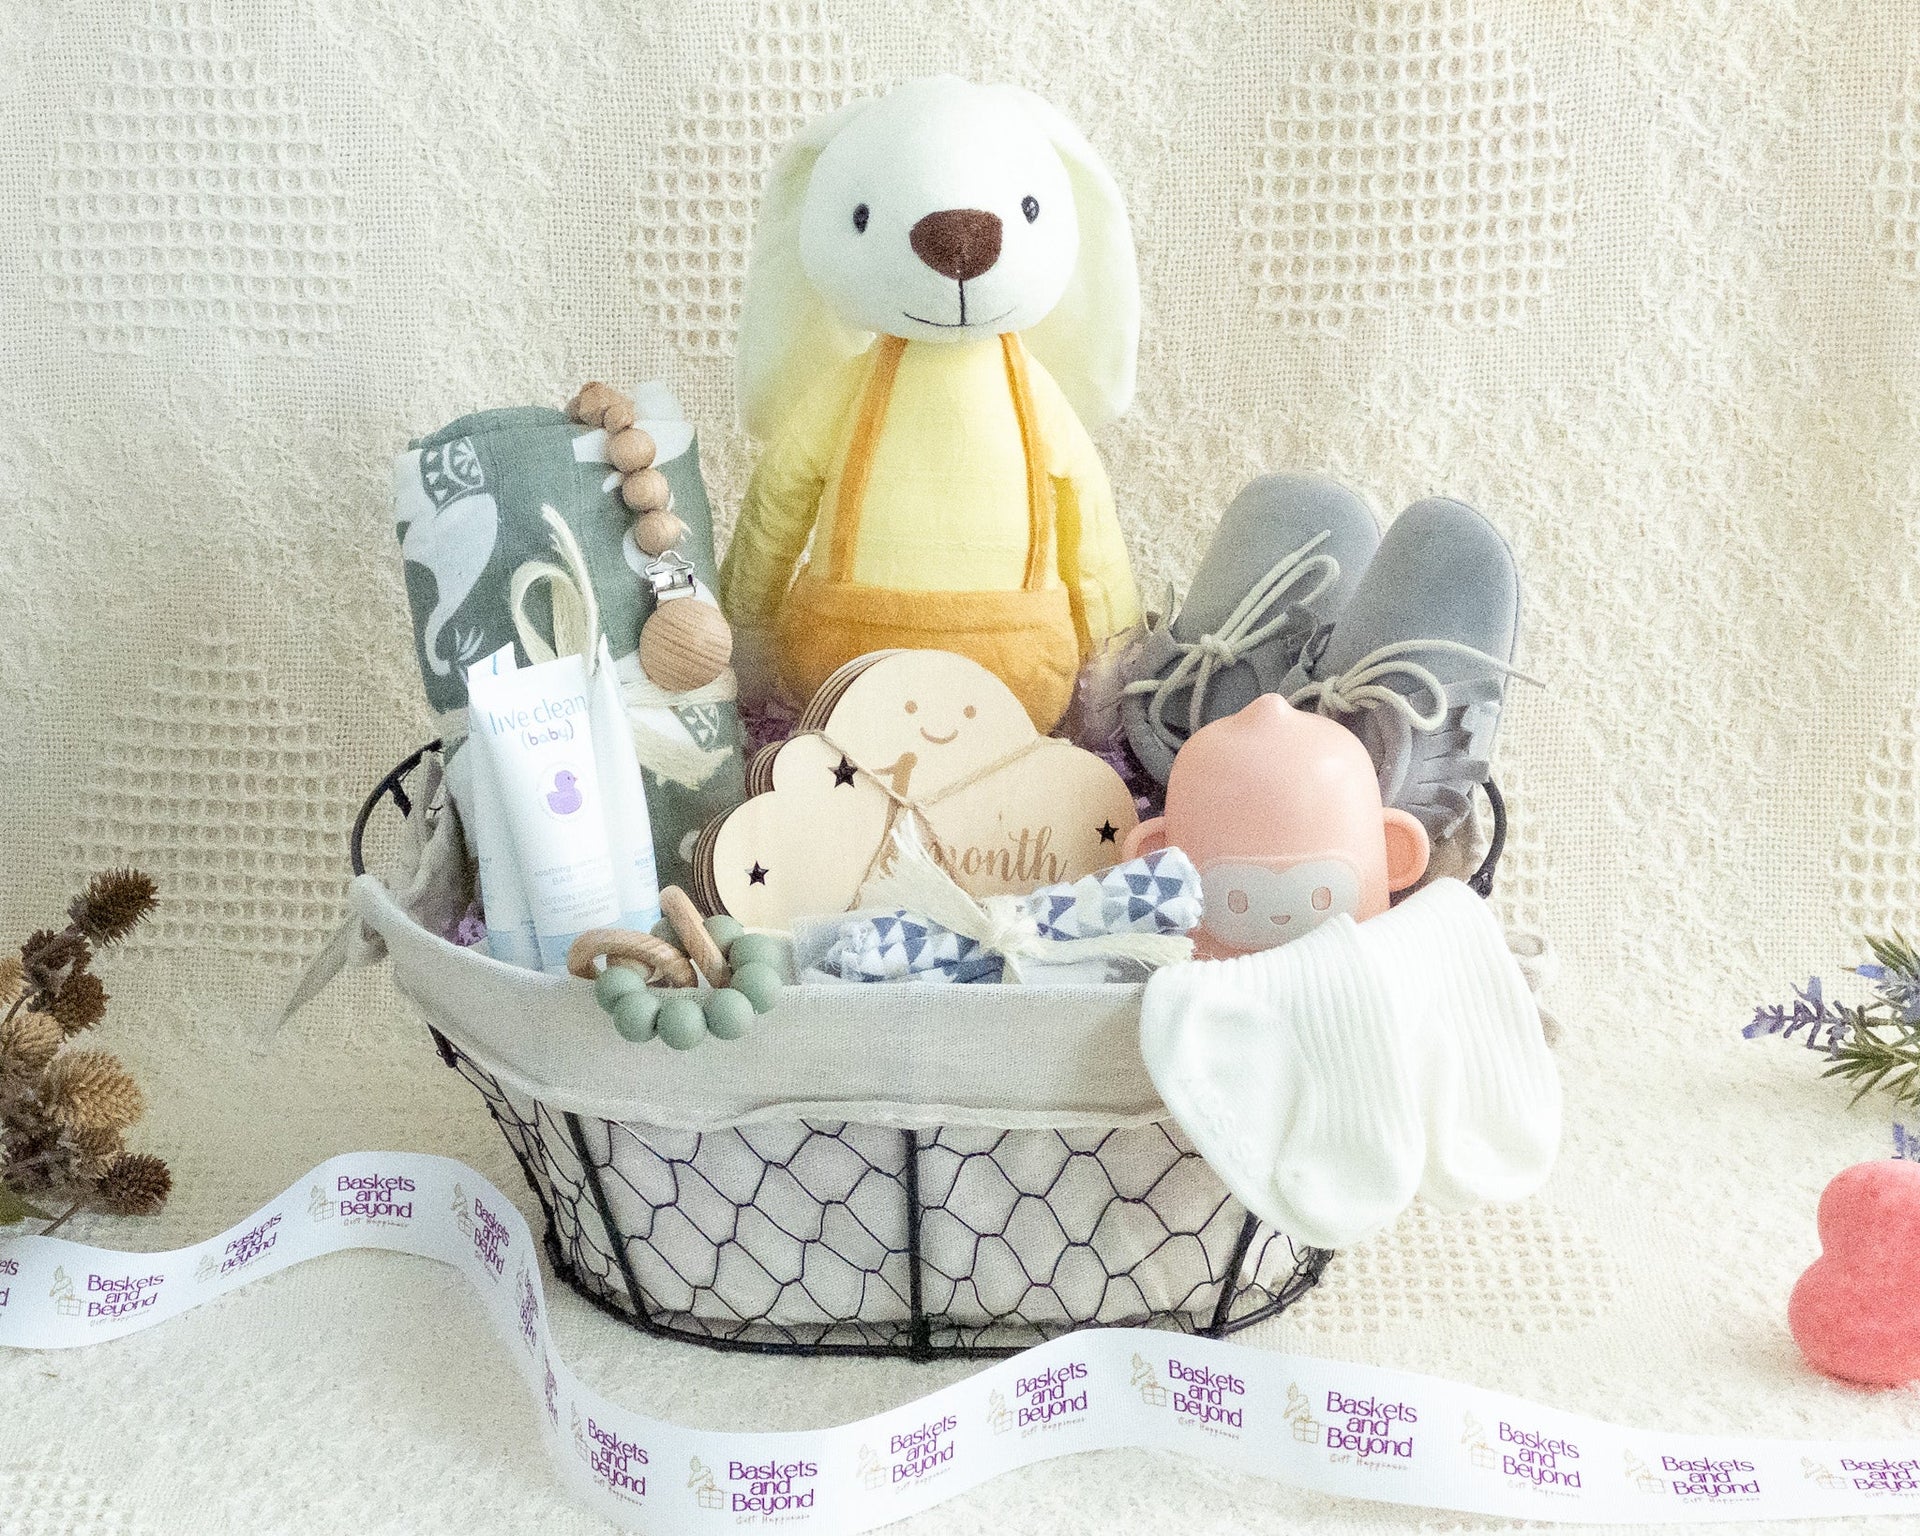 All the Care You Need – Baskets and Beyond